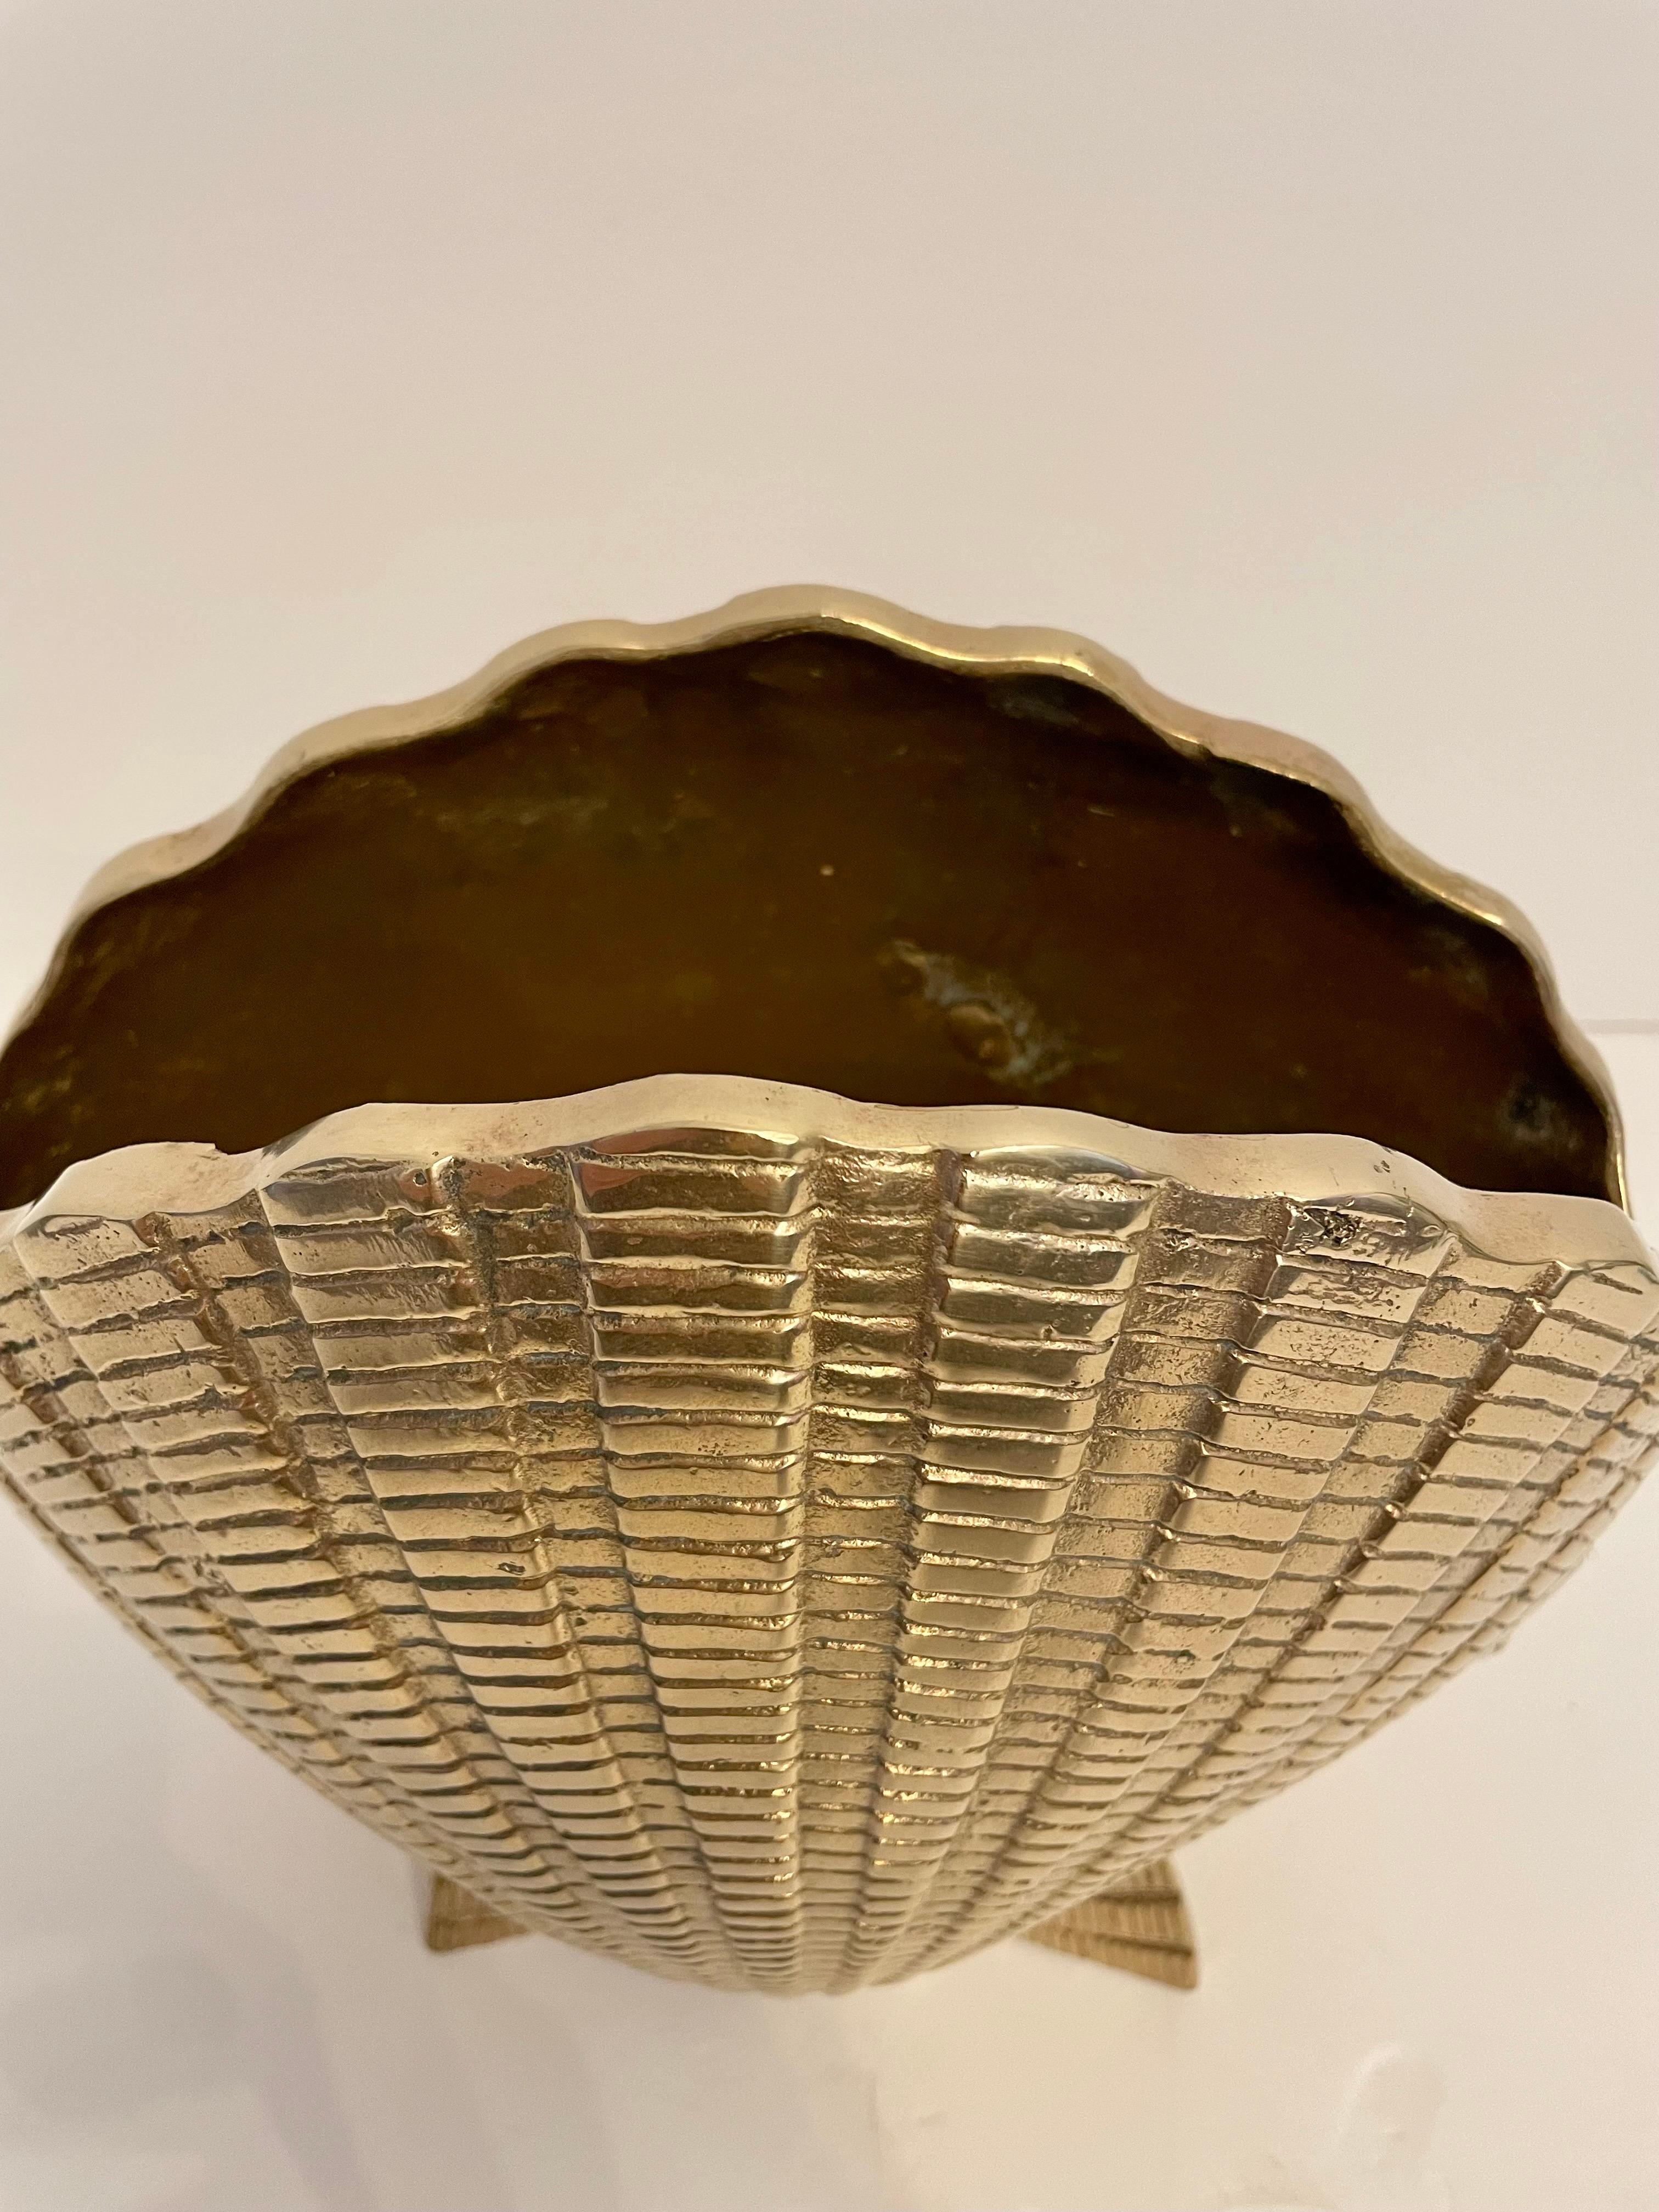 Large Brass Seashell Planter or Vase. Very good quality and detail. Heavy. Good overall condition. Measures 9”wide x 8.5